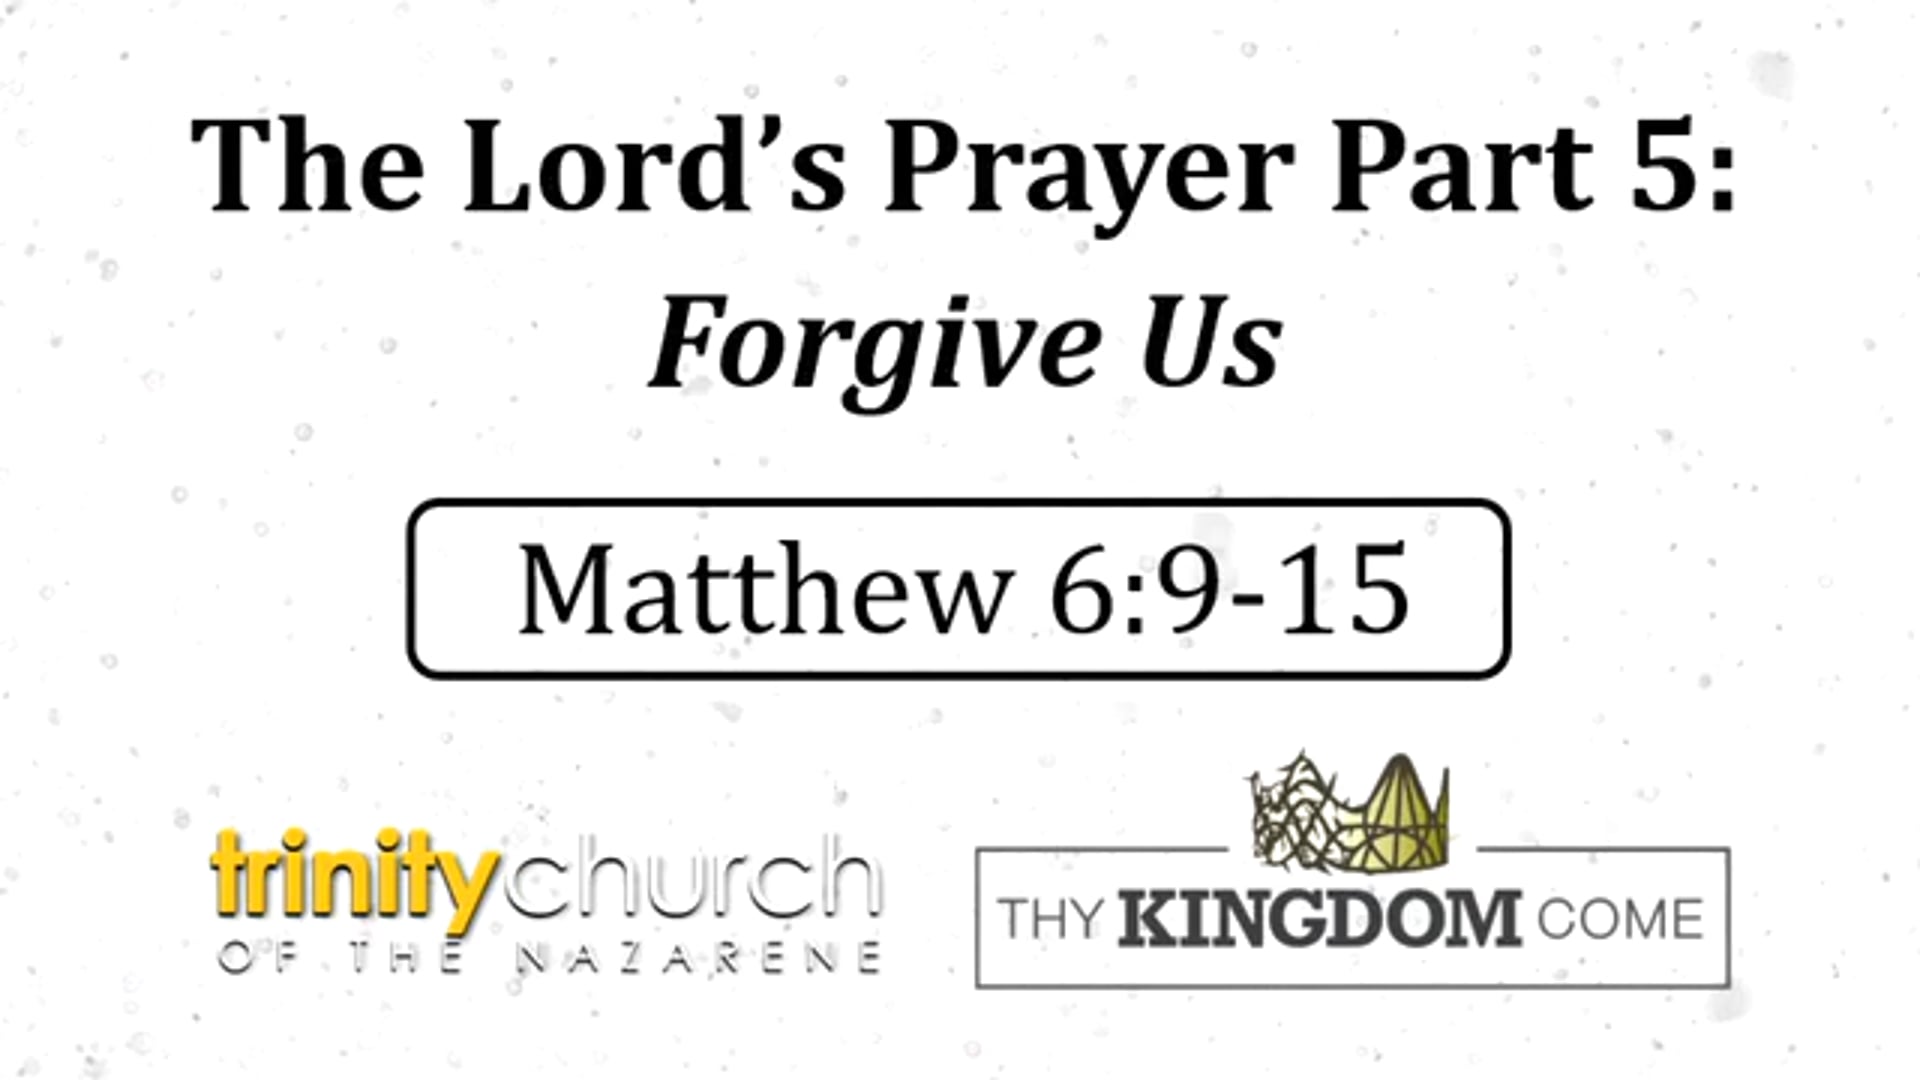 5-17, The Lord's Prayer, Part 5